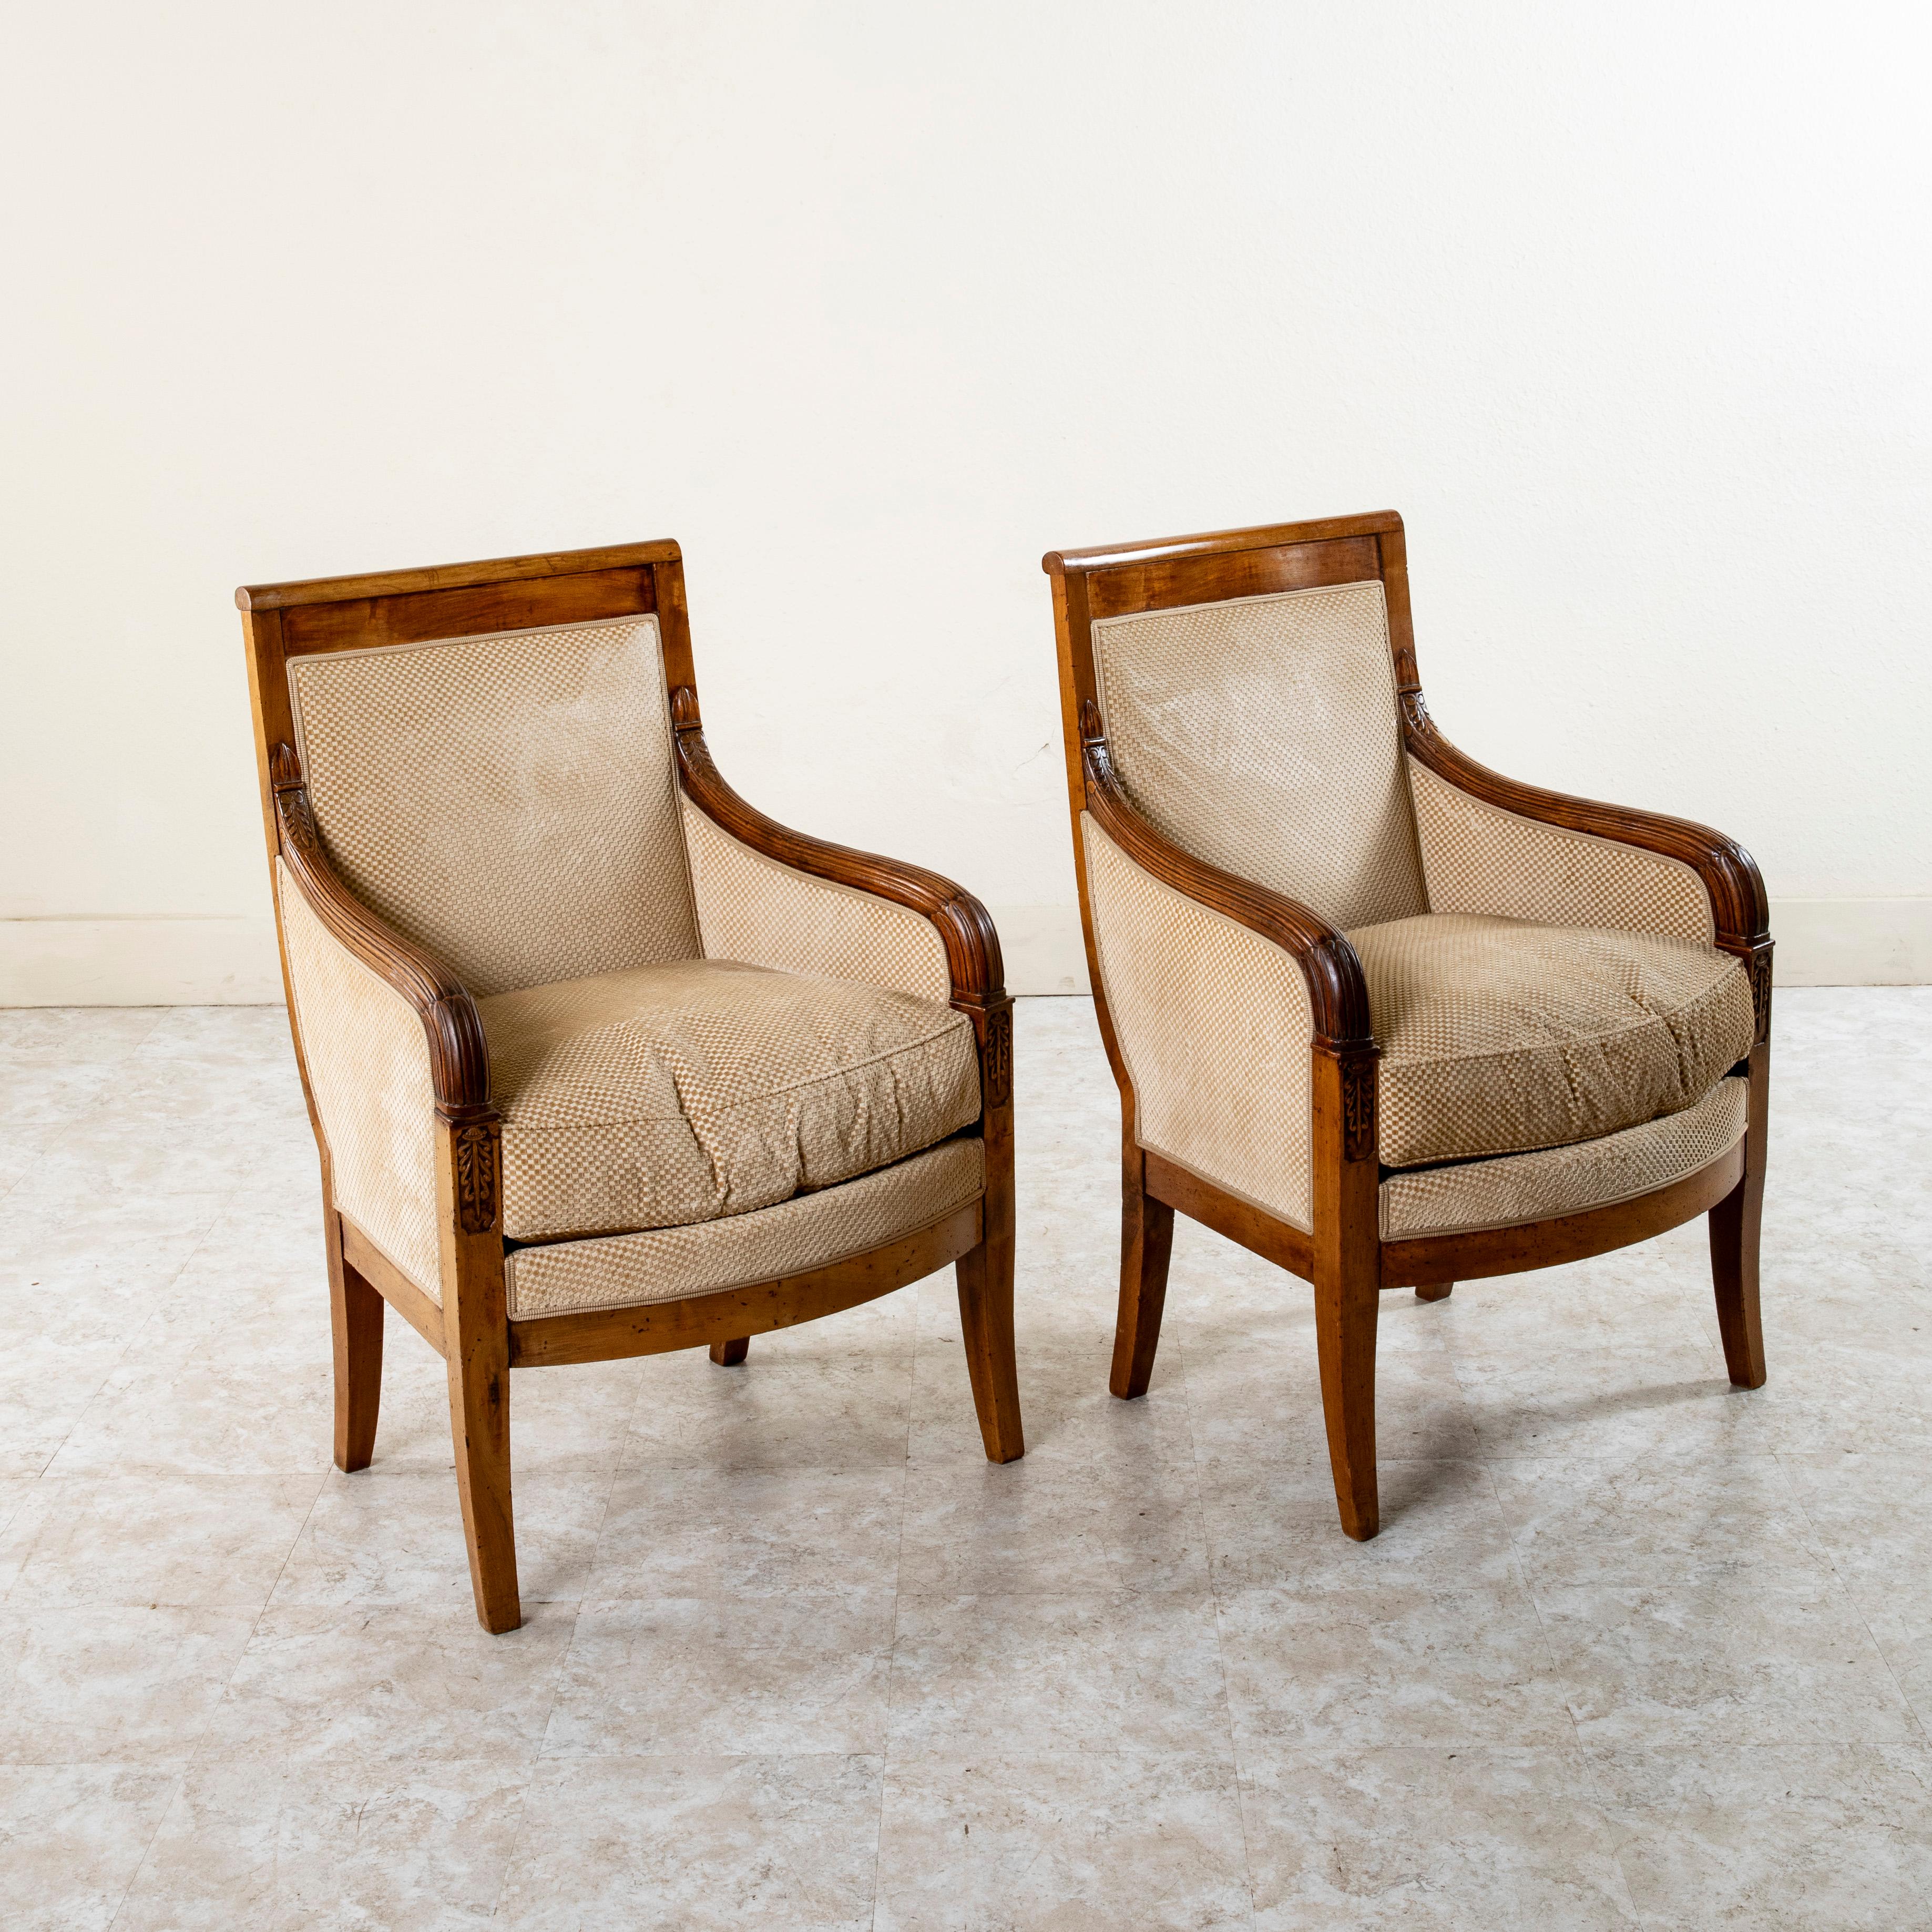 From a home in Versailles, France, this pair of early nineteenth century French Empire period bergeres or armchairs is constructed of solid walnut with a rich patina that only comes with age. These chairs feature beautifully hand carved armrests